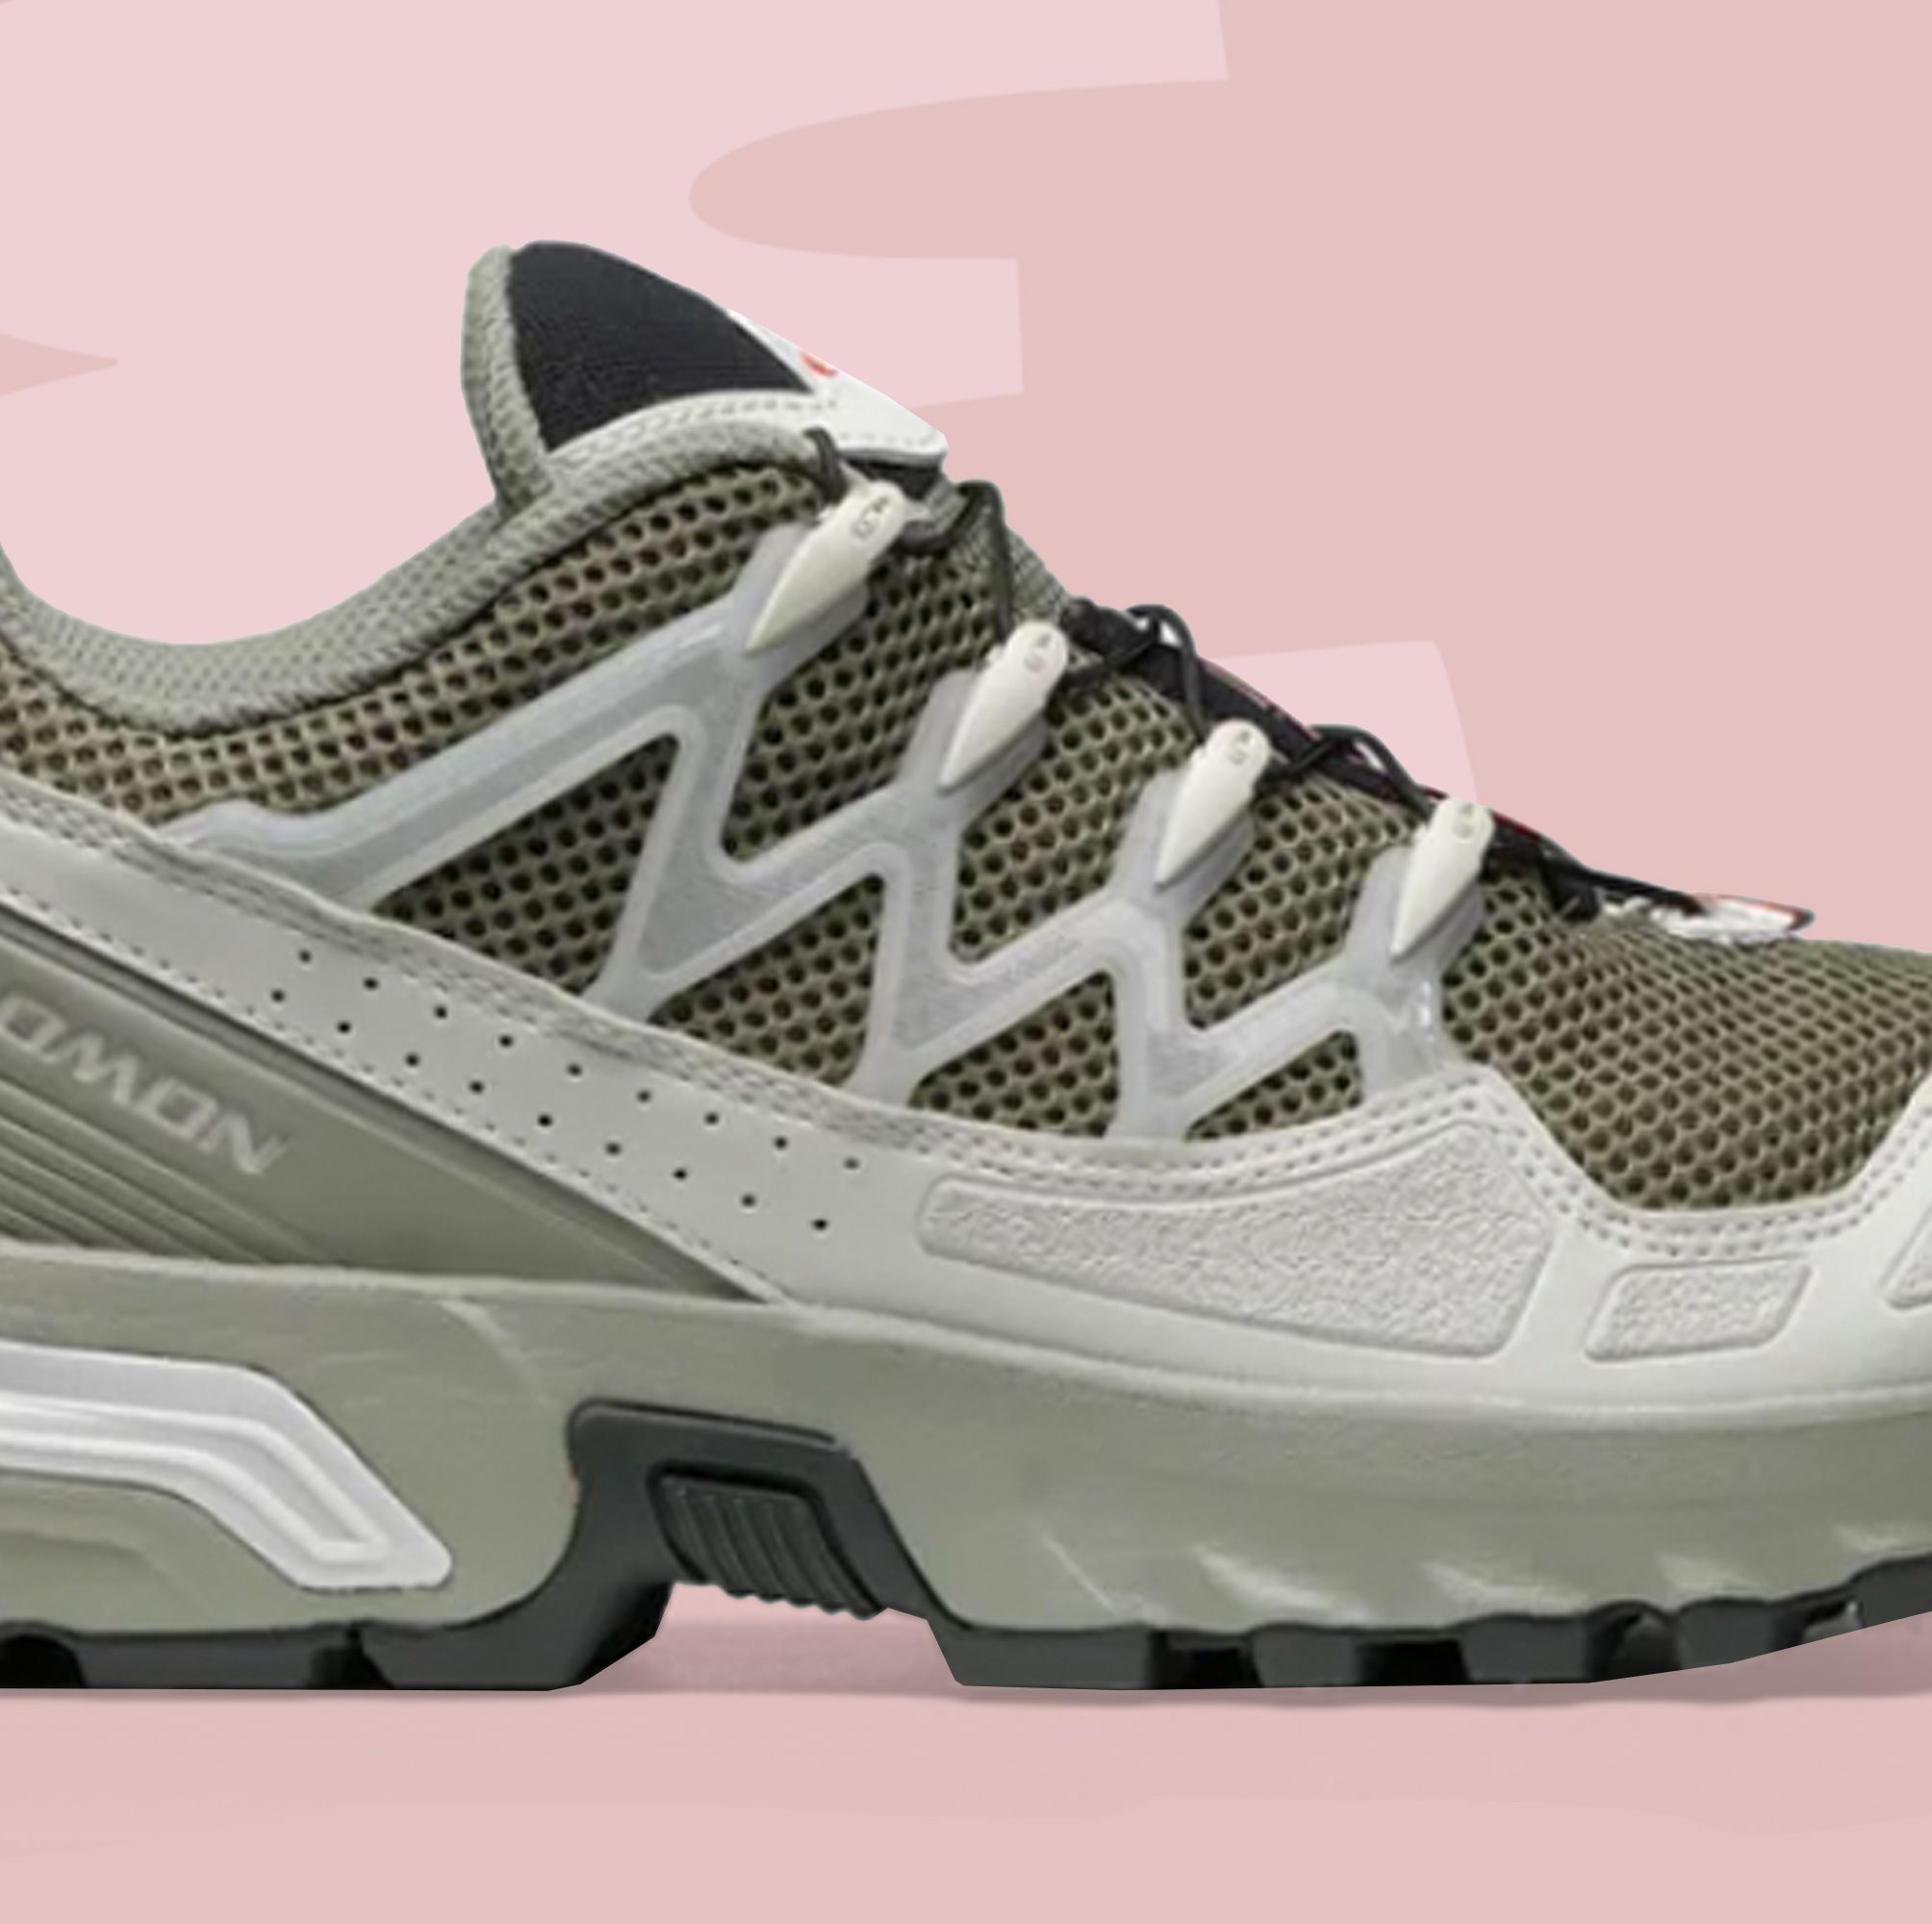 13 Salomon Sneakers That'll Have You Ready for Any Adventure